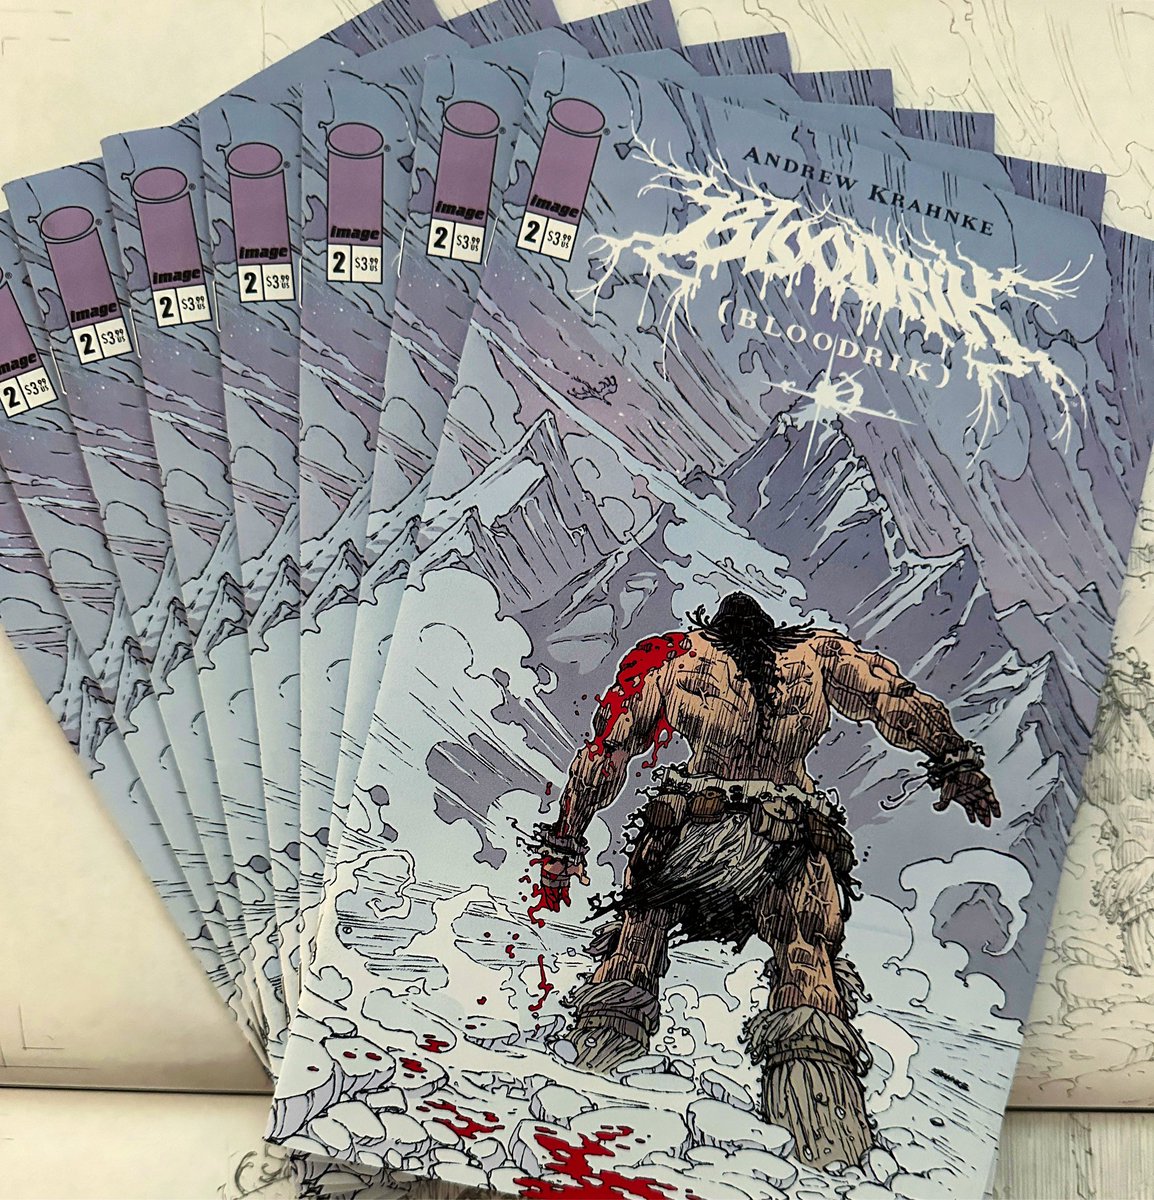 SECOND COURSE! BLOODRIK #2 is in shops today! Thanks to everyone who’s picking it up, hope you enjoy it. Happy New Comic Day! #BLOODRIK @imagecomics #newcomicbookday